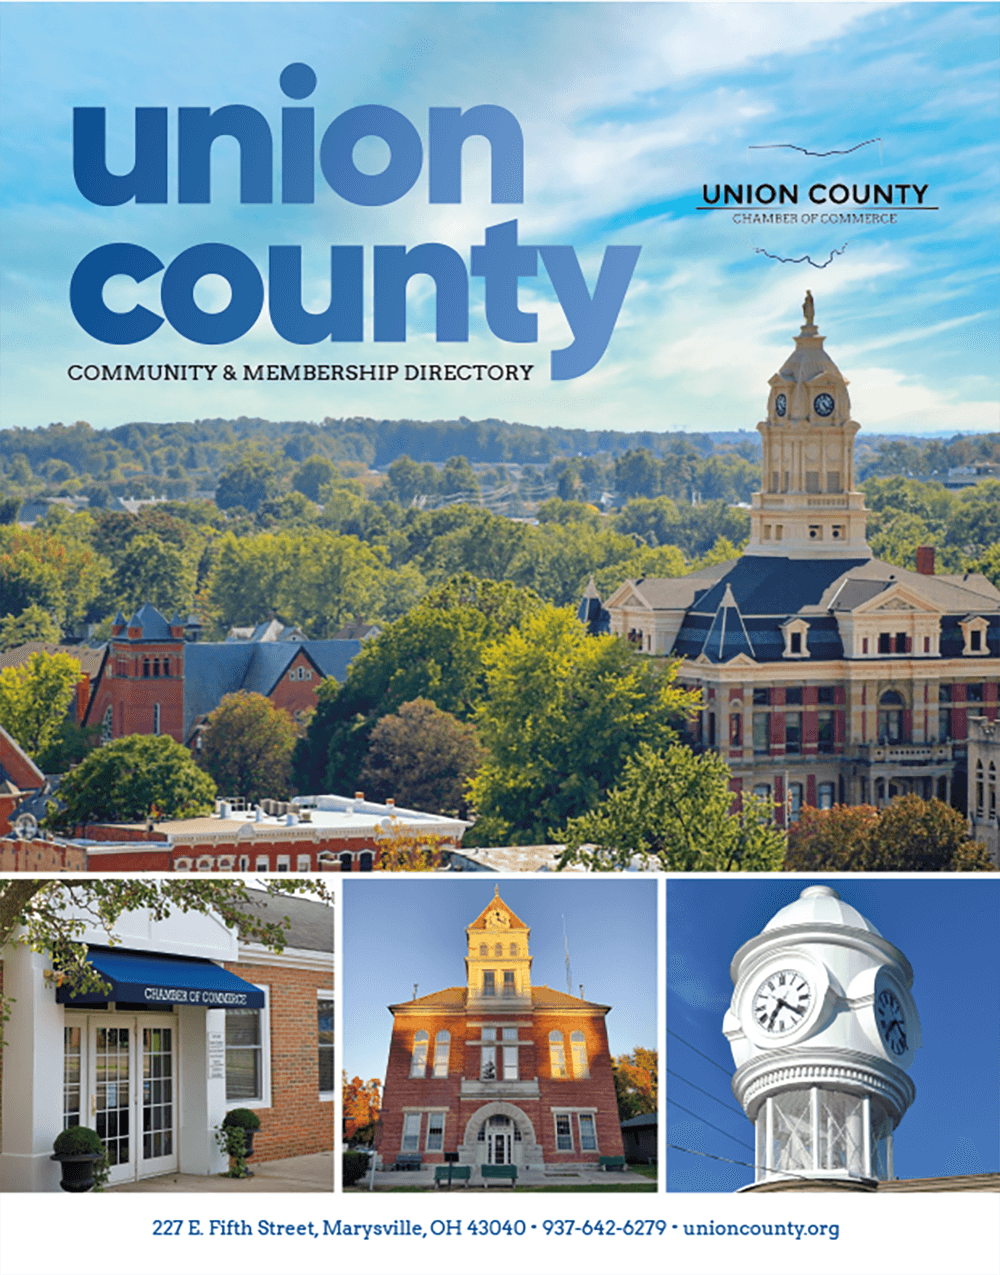 Union County Cover_FINAL_THUMB